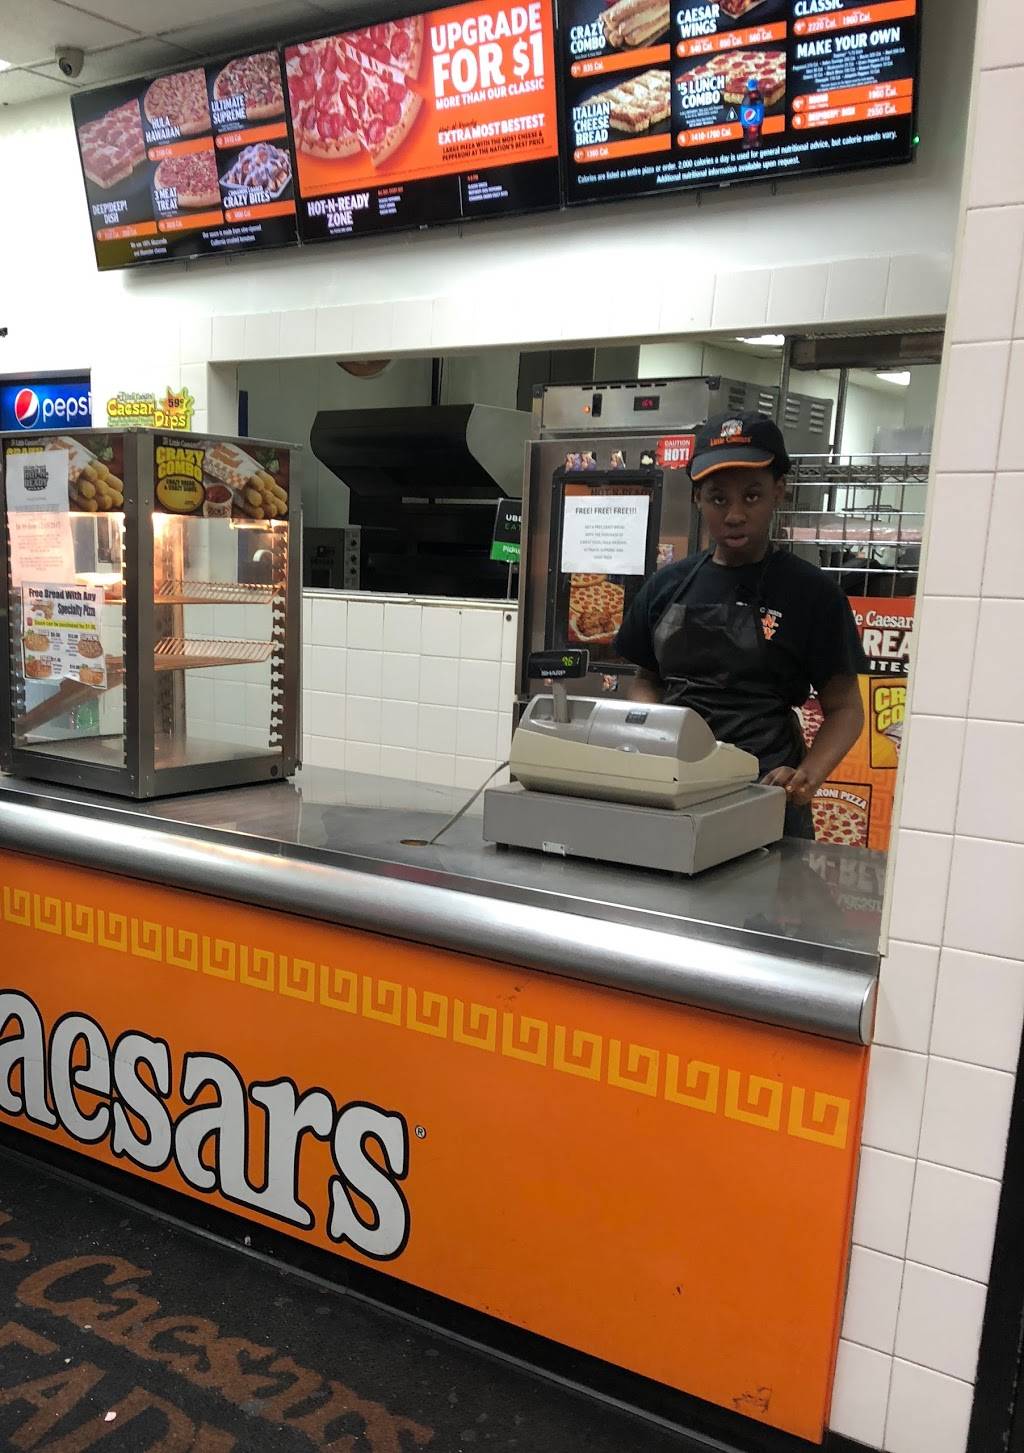 Little Caesars Pizza | meal takeaway | 623 E Tremont Ave, Bronx, NY 10457, USA | 3472715300 OR +1 347-271-5300